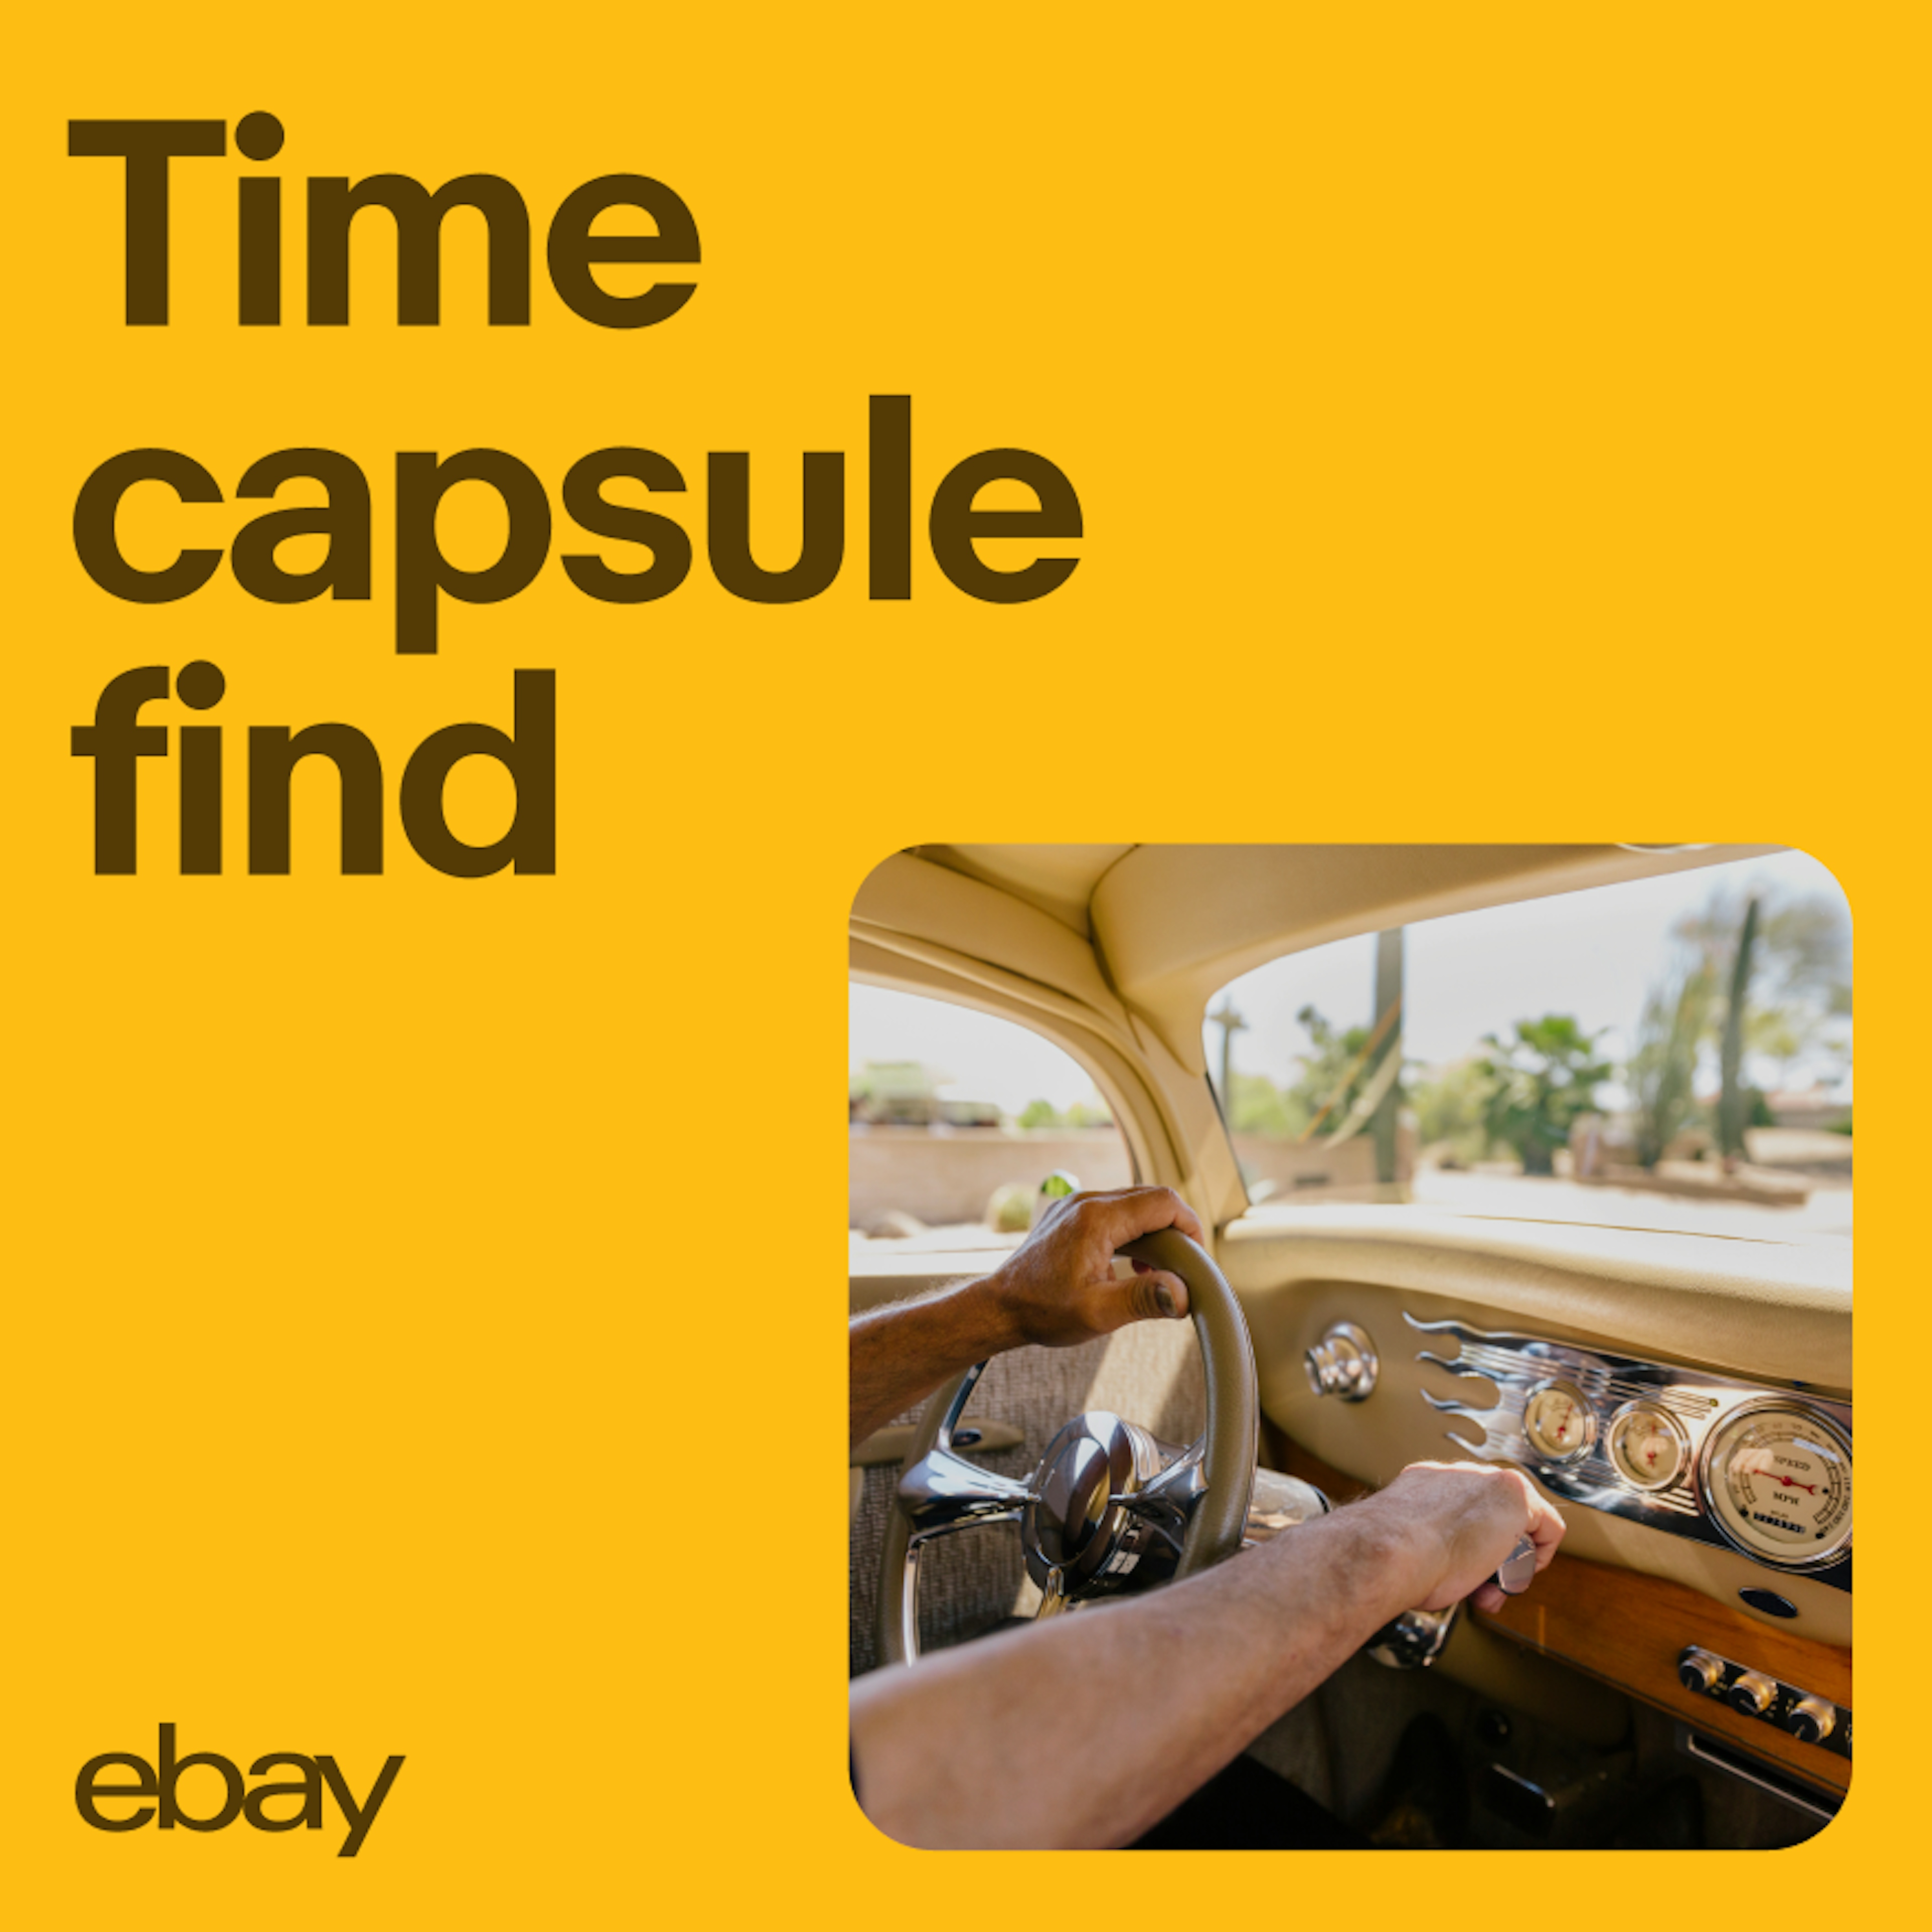 A vibrant yellow ad for motors. The official campaign is “Time Capsule Find”, but the headline uses “Time capsule find”.